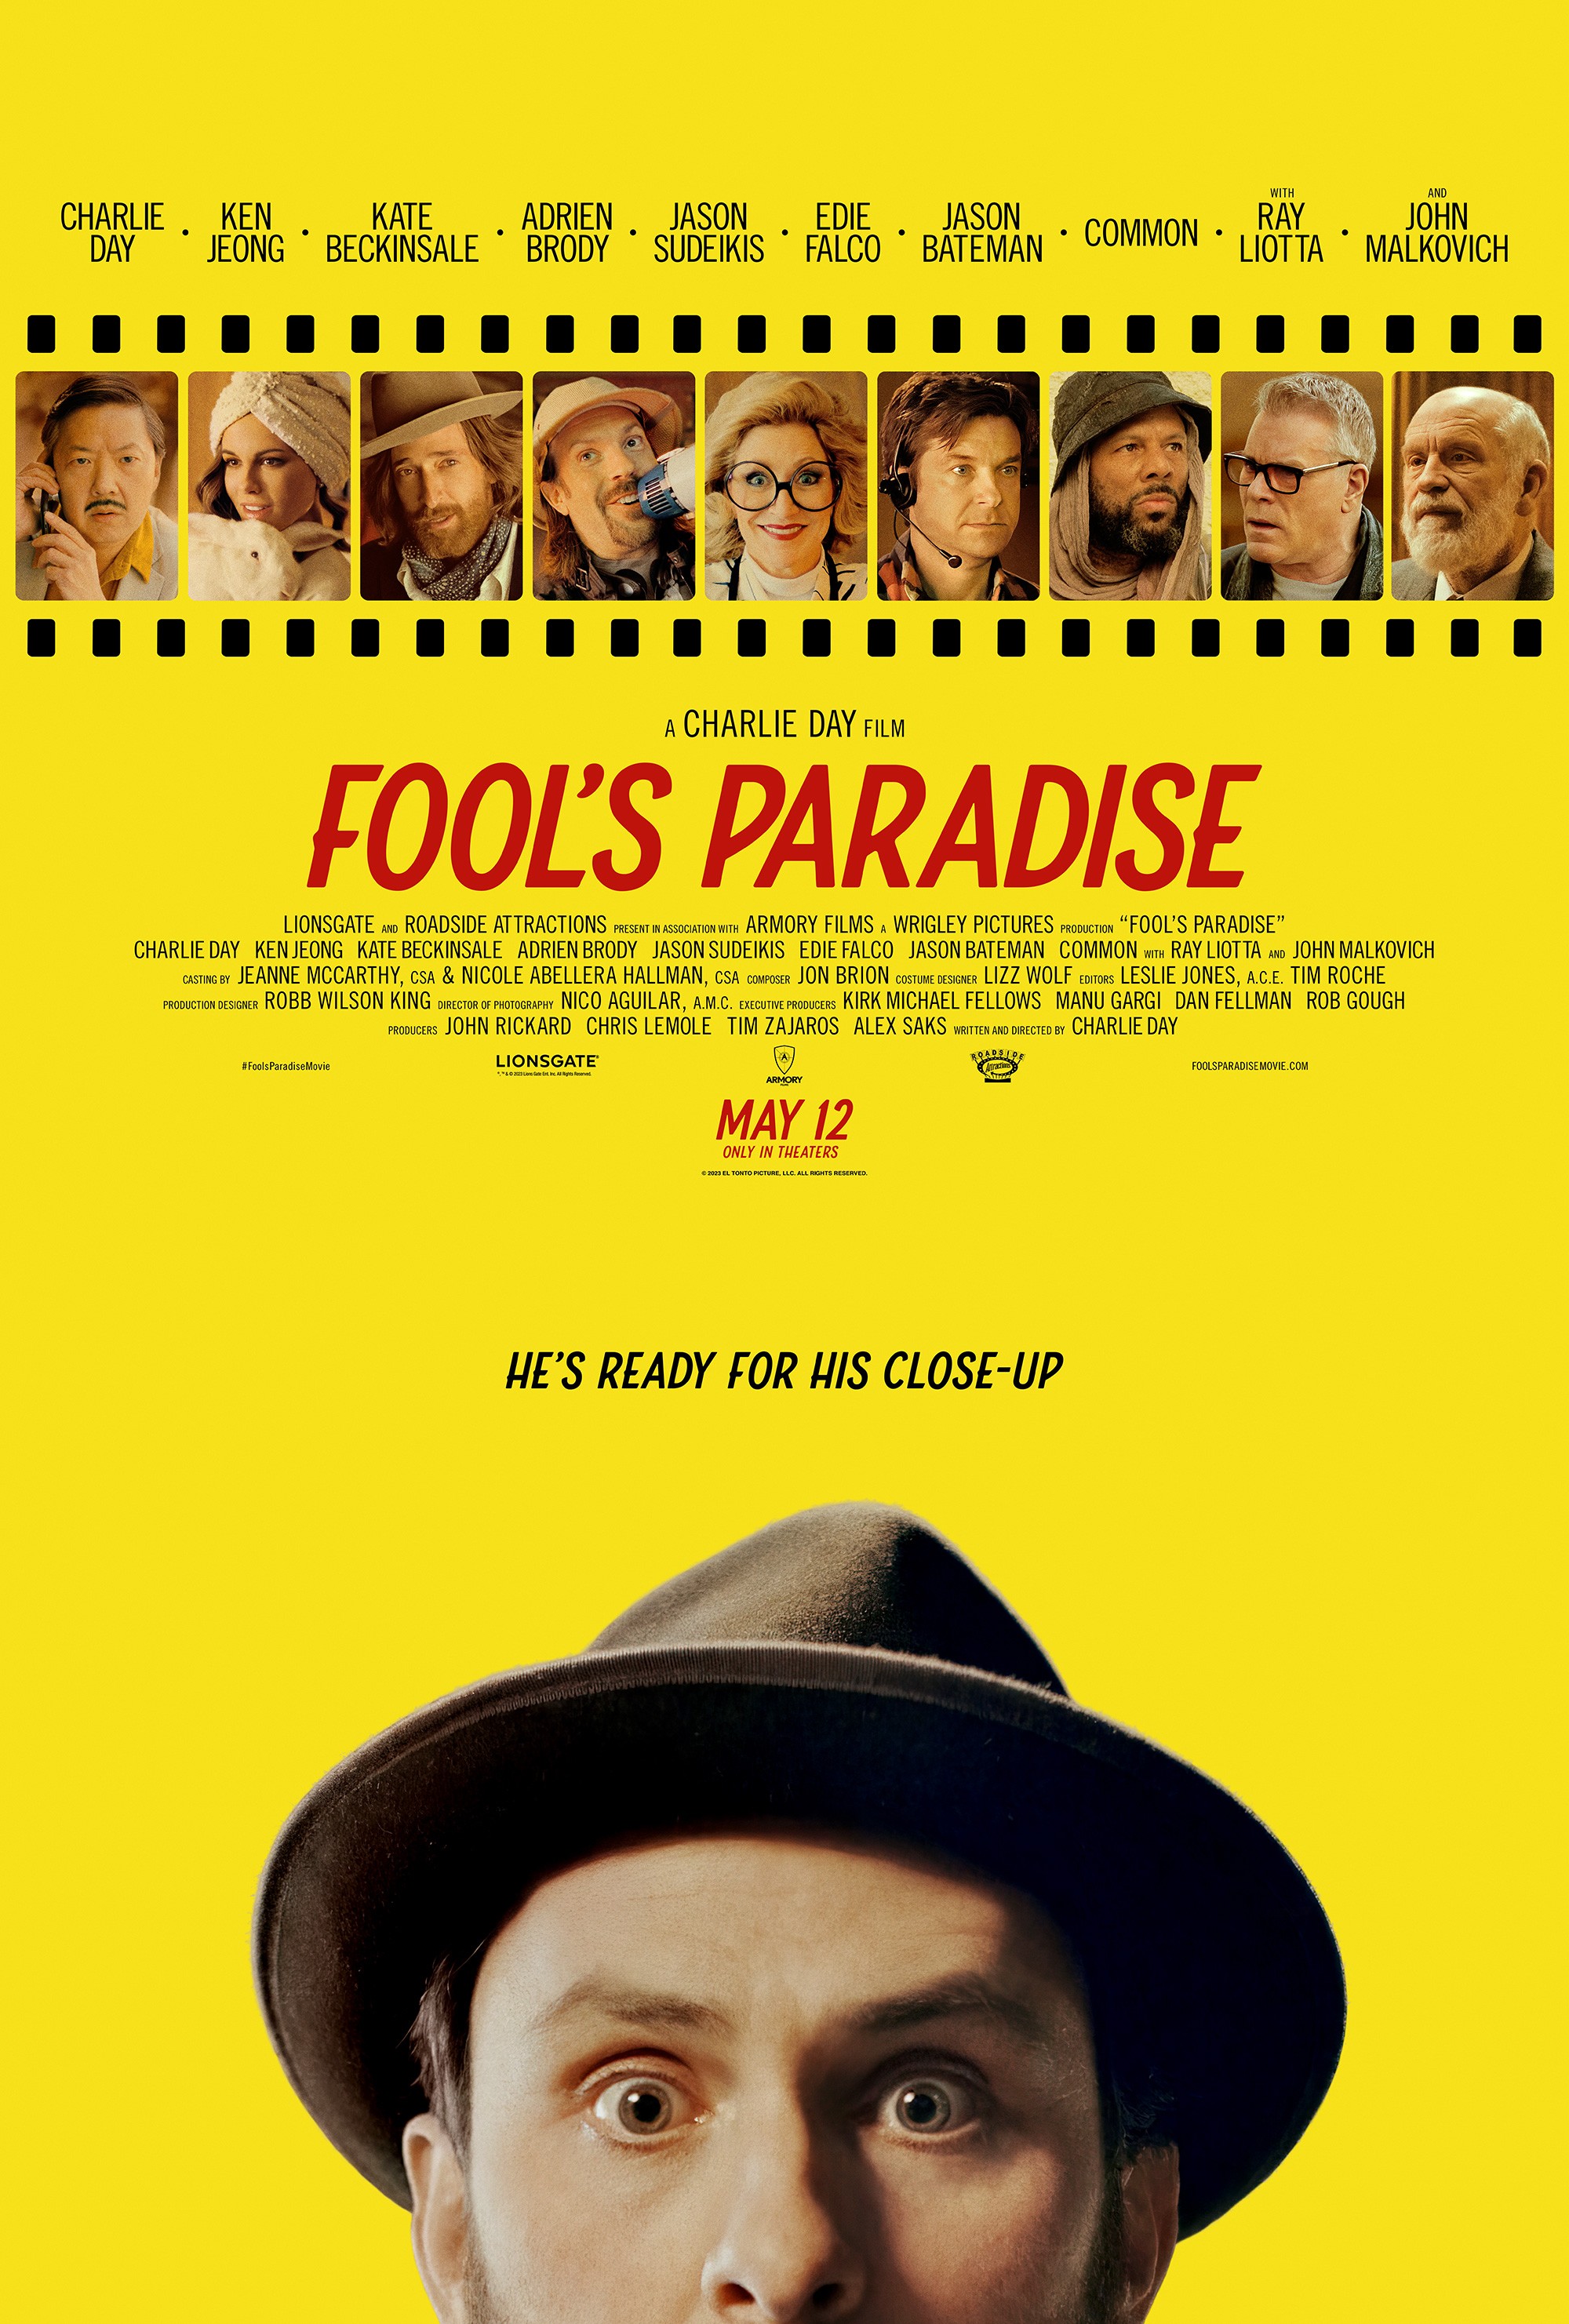 Ticket to Paradise - Rotten Tomatoes